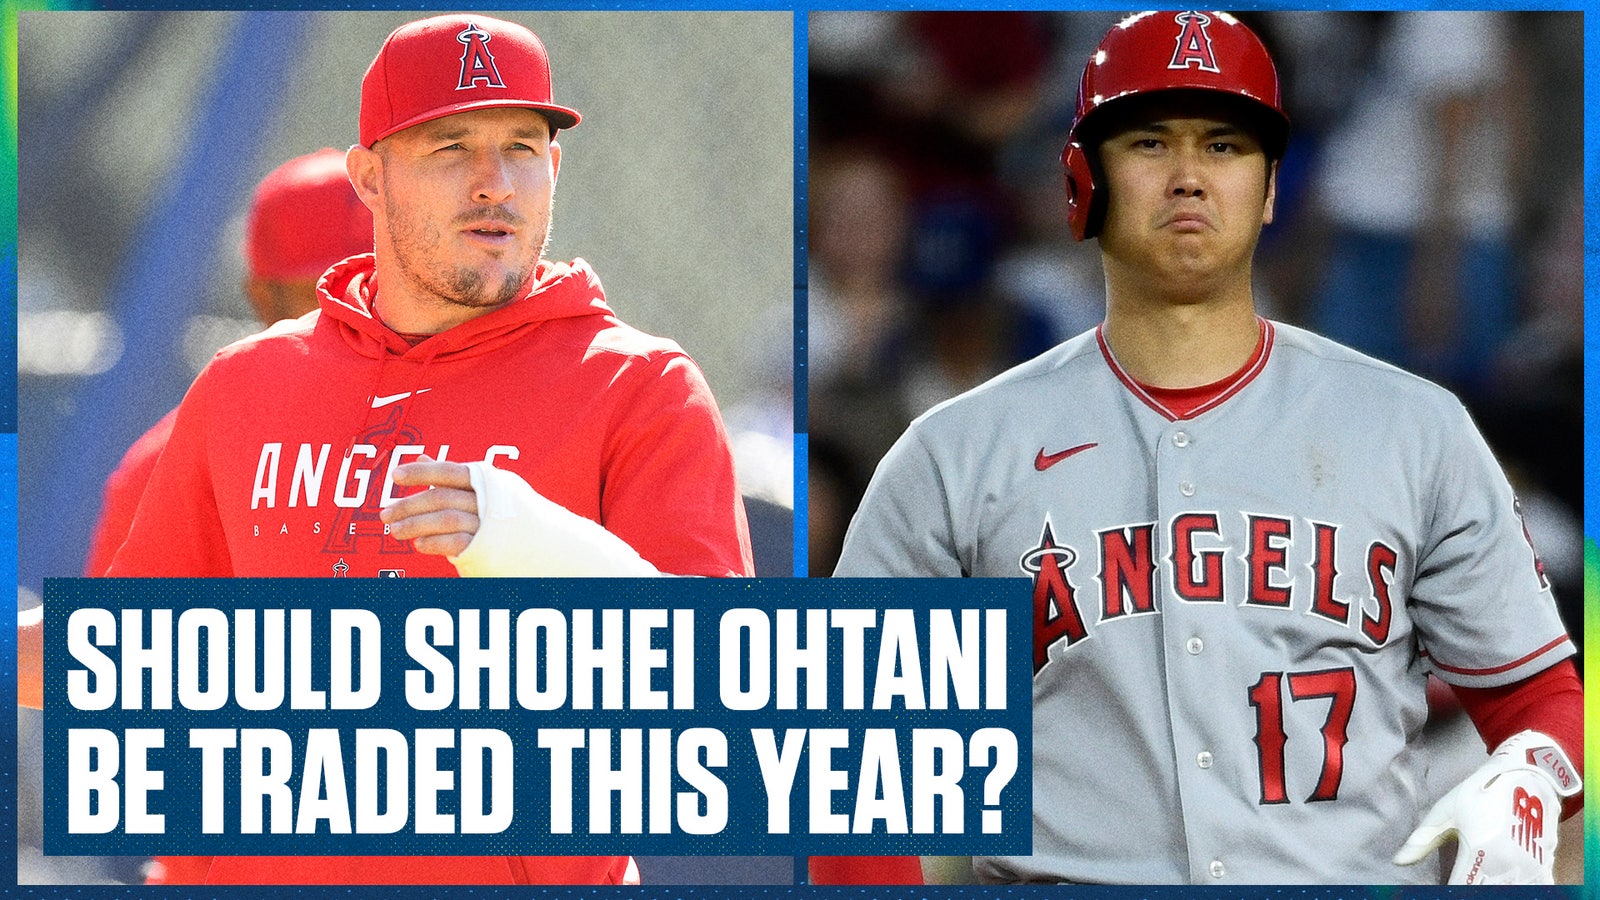 Should Shohei Ohtani be traded at the deadline after Mike Trout's injury?